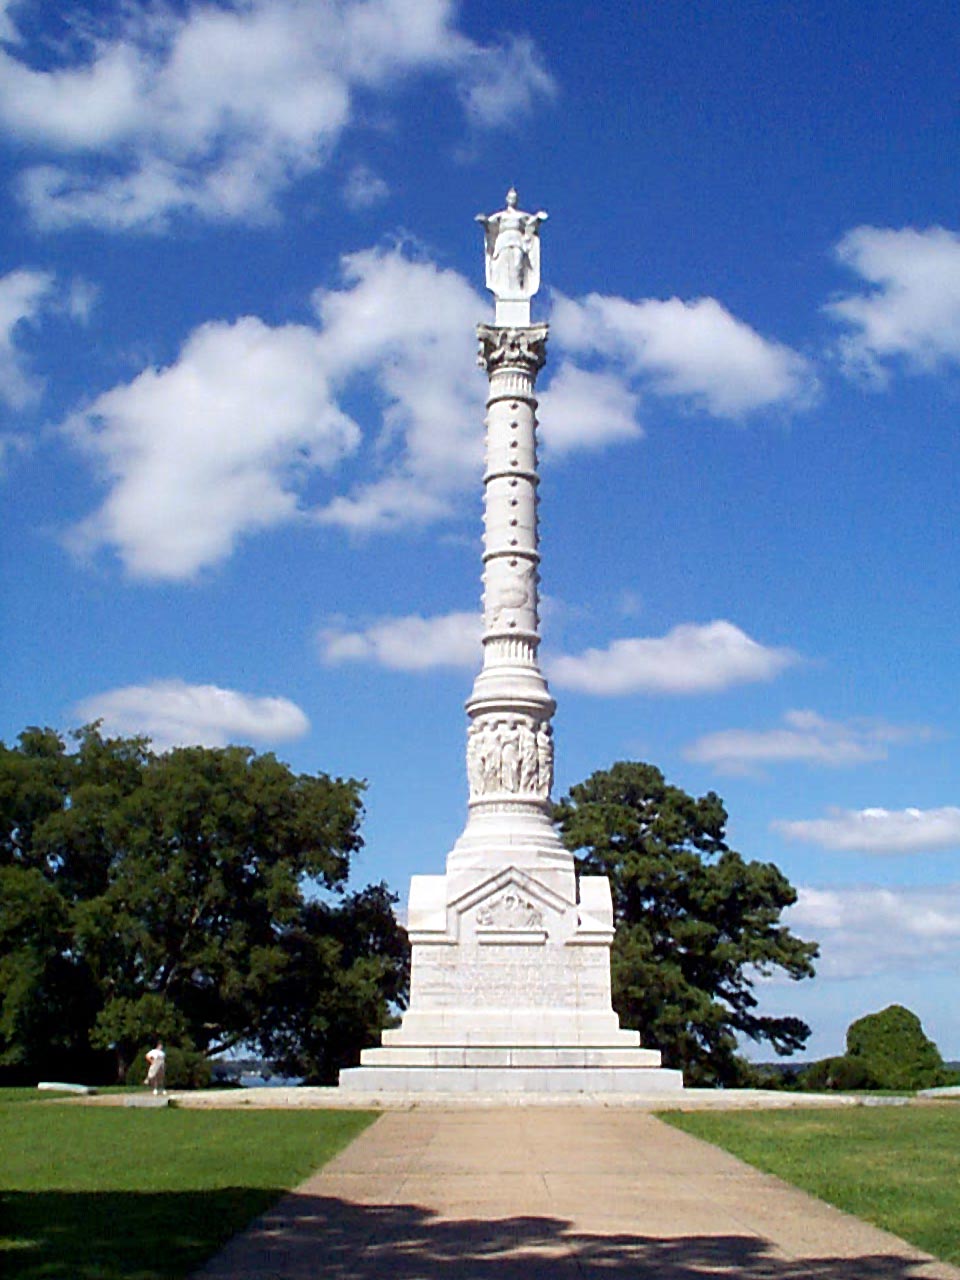 This is an image of the Yorktown Victory Memorial at Colonial National Historical Park